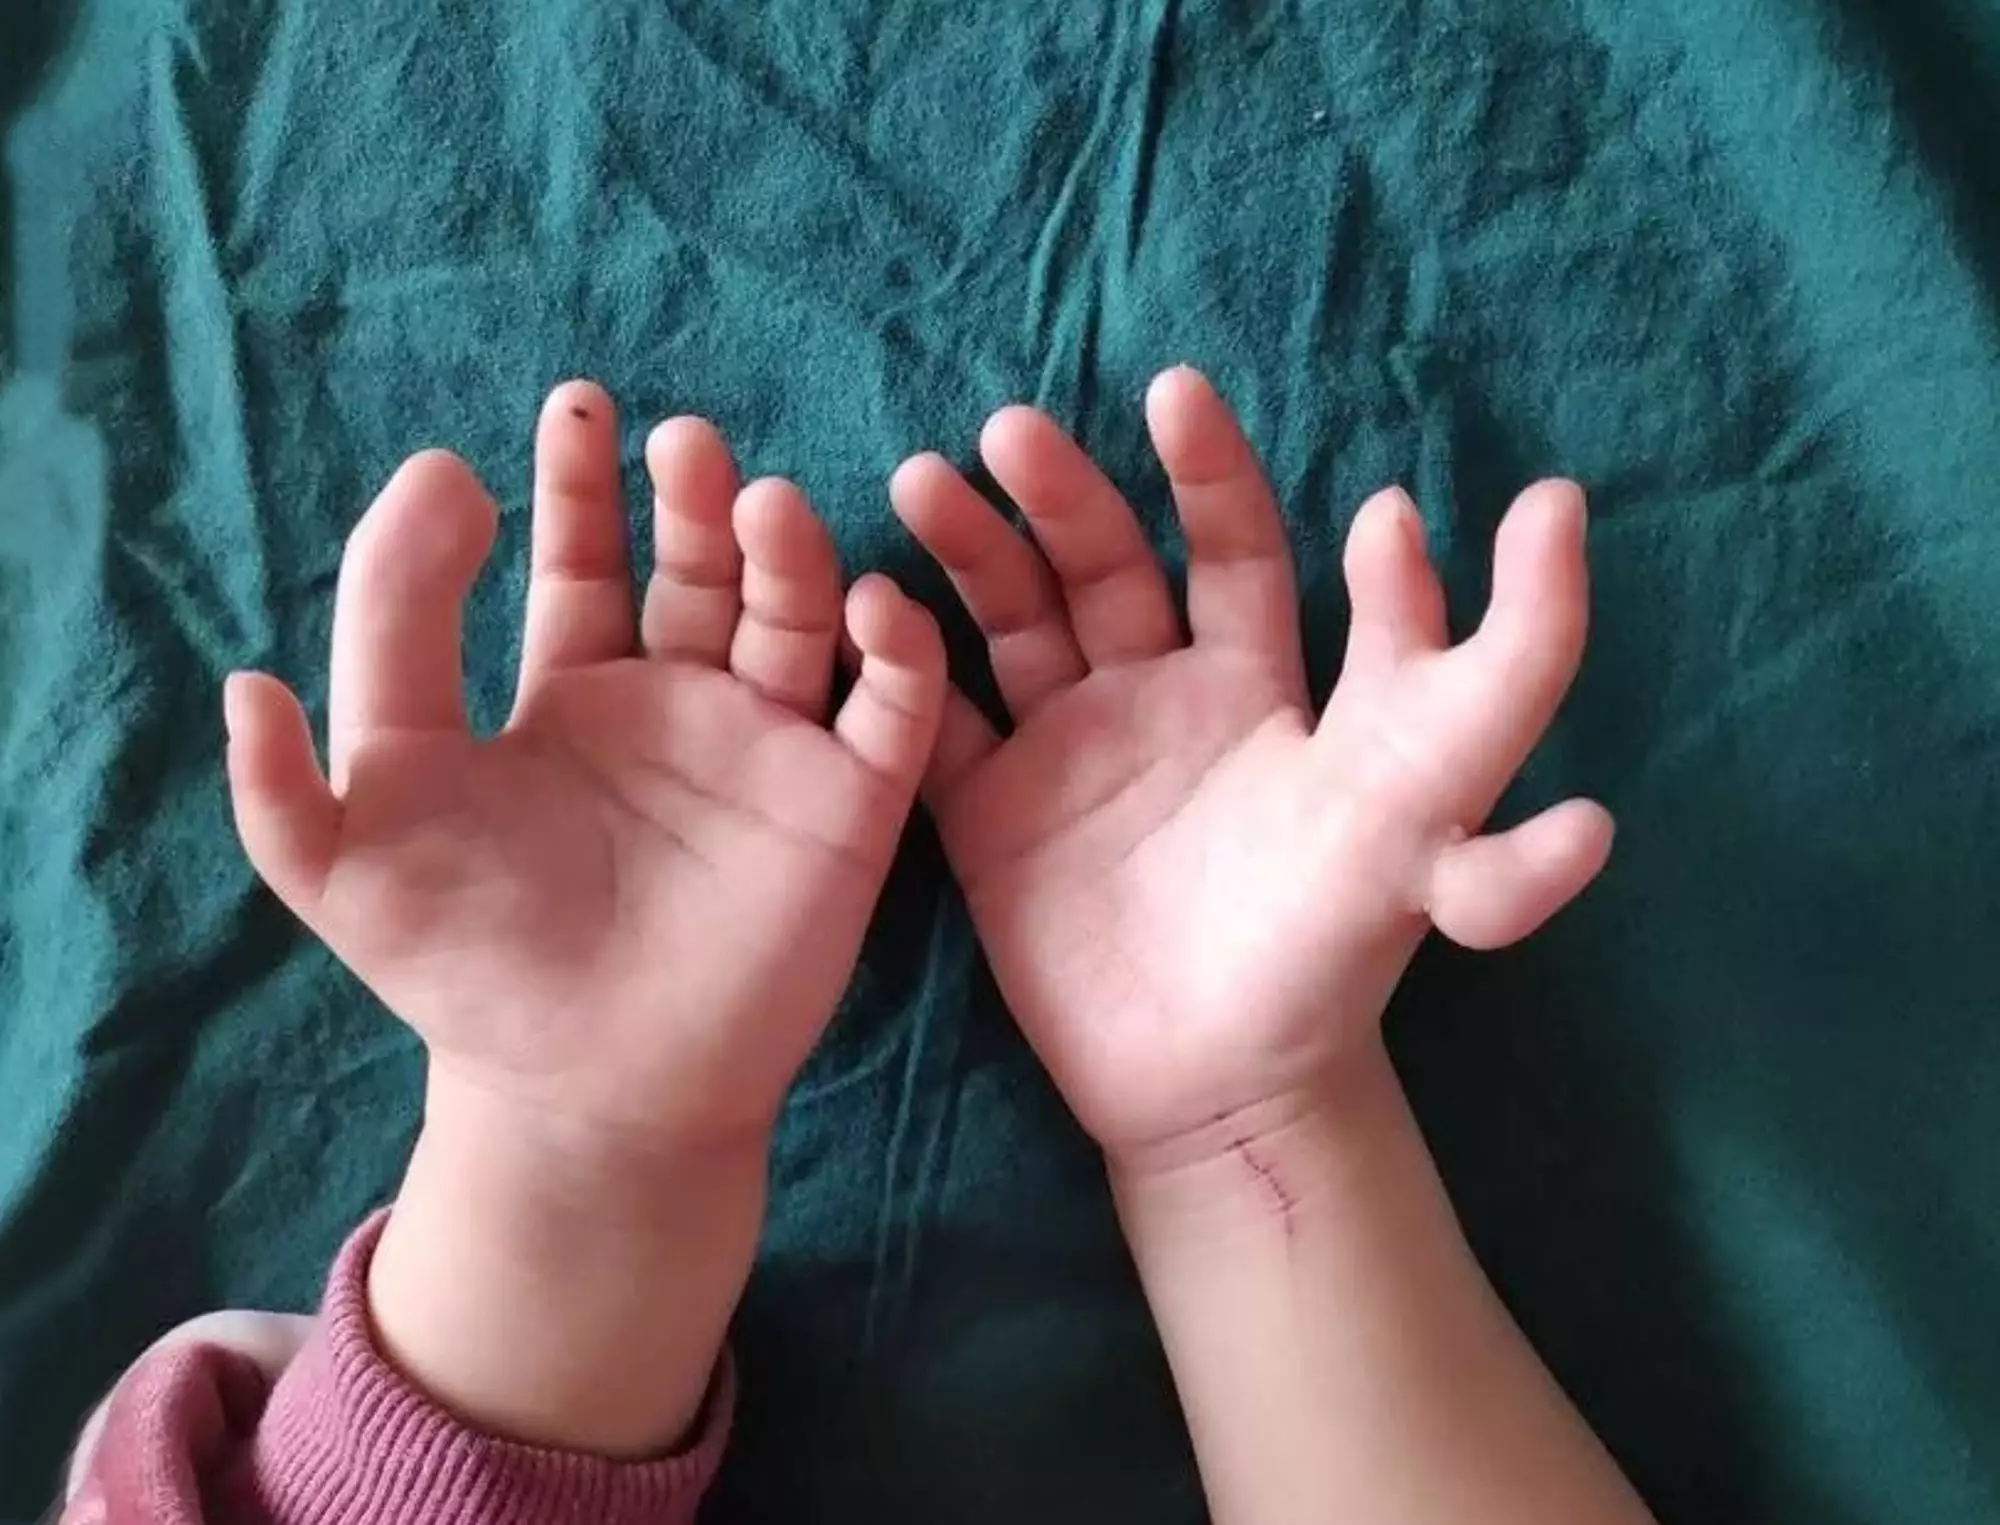 This three-year-old Chinese girl had 13 fingers.